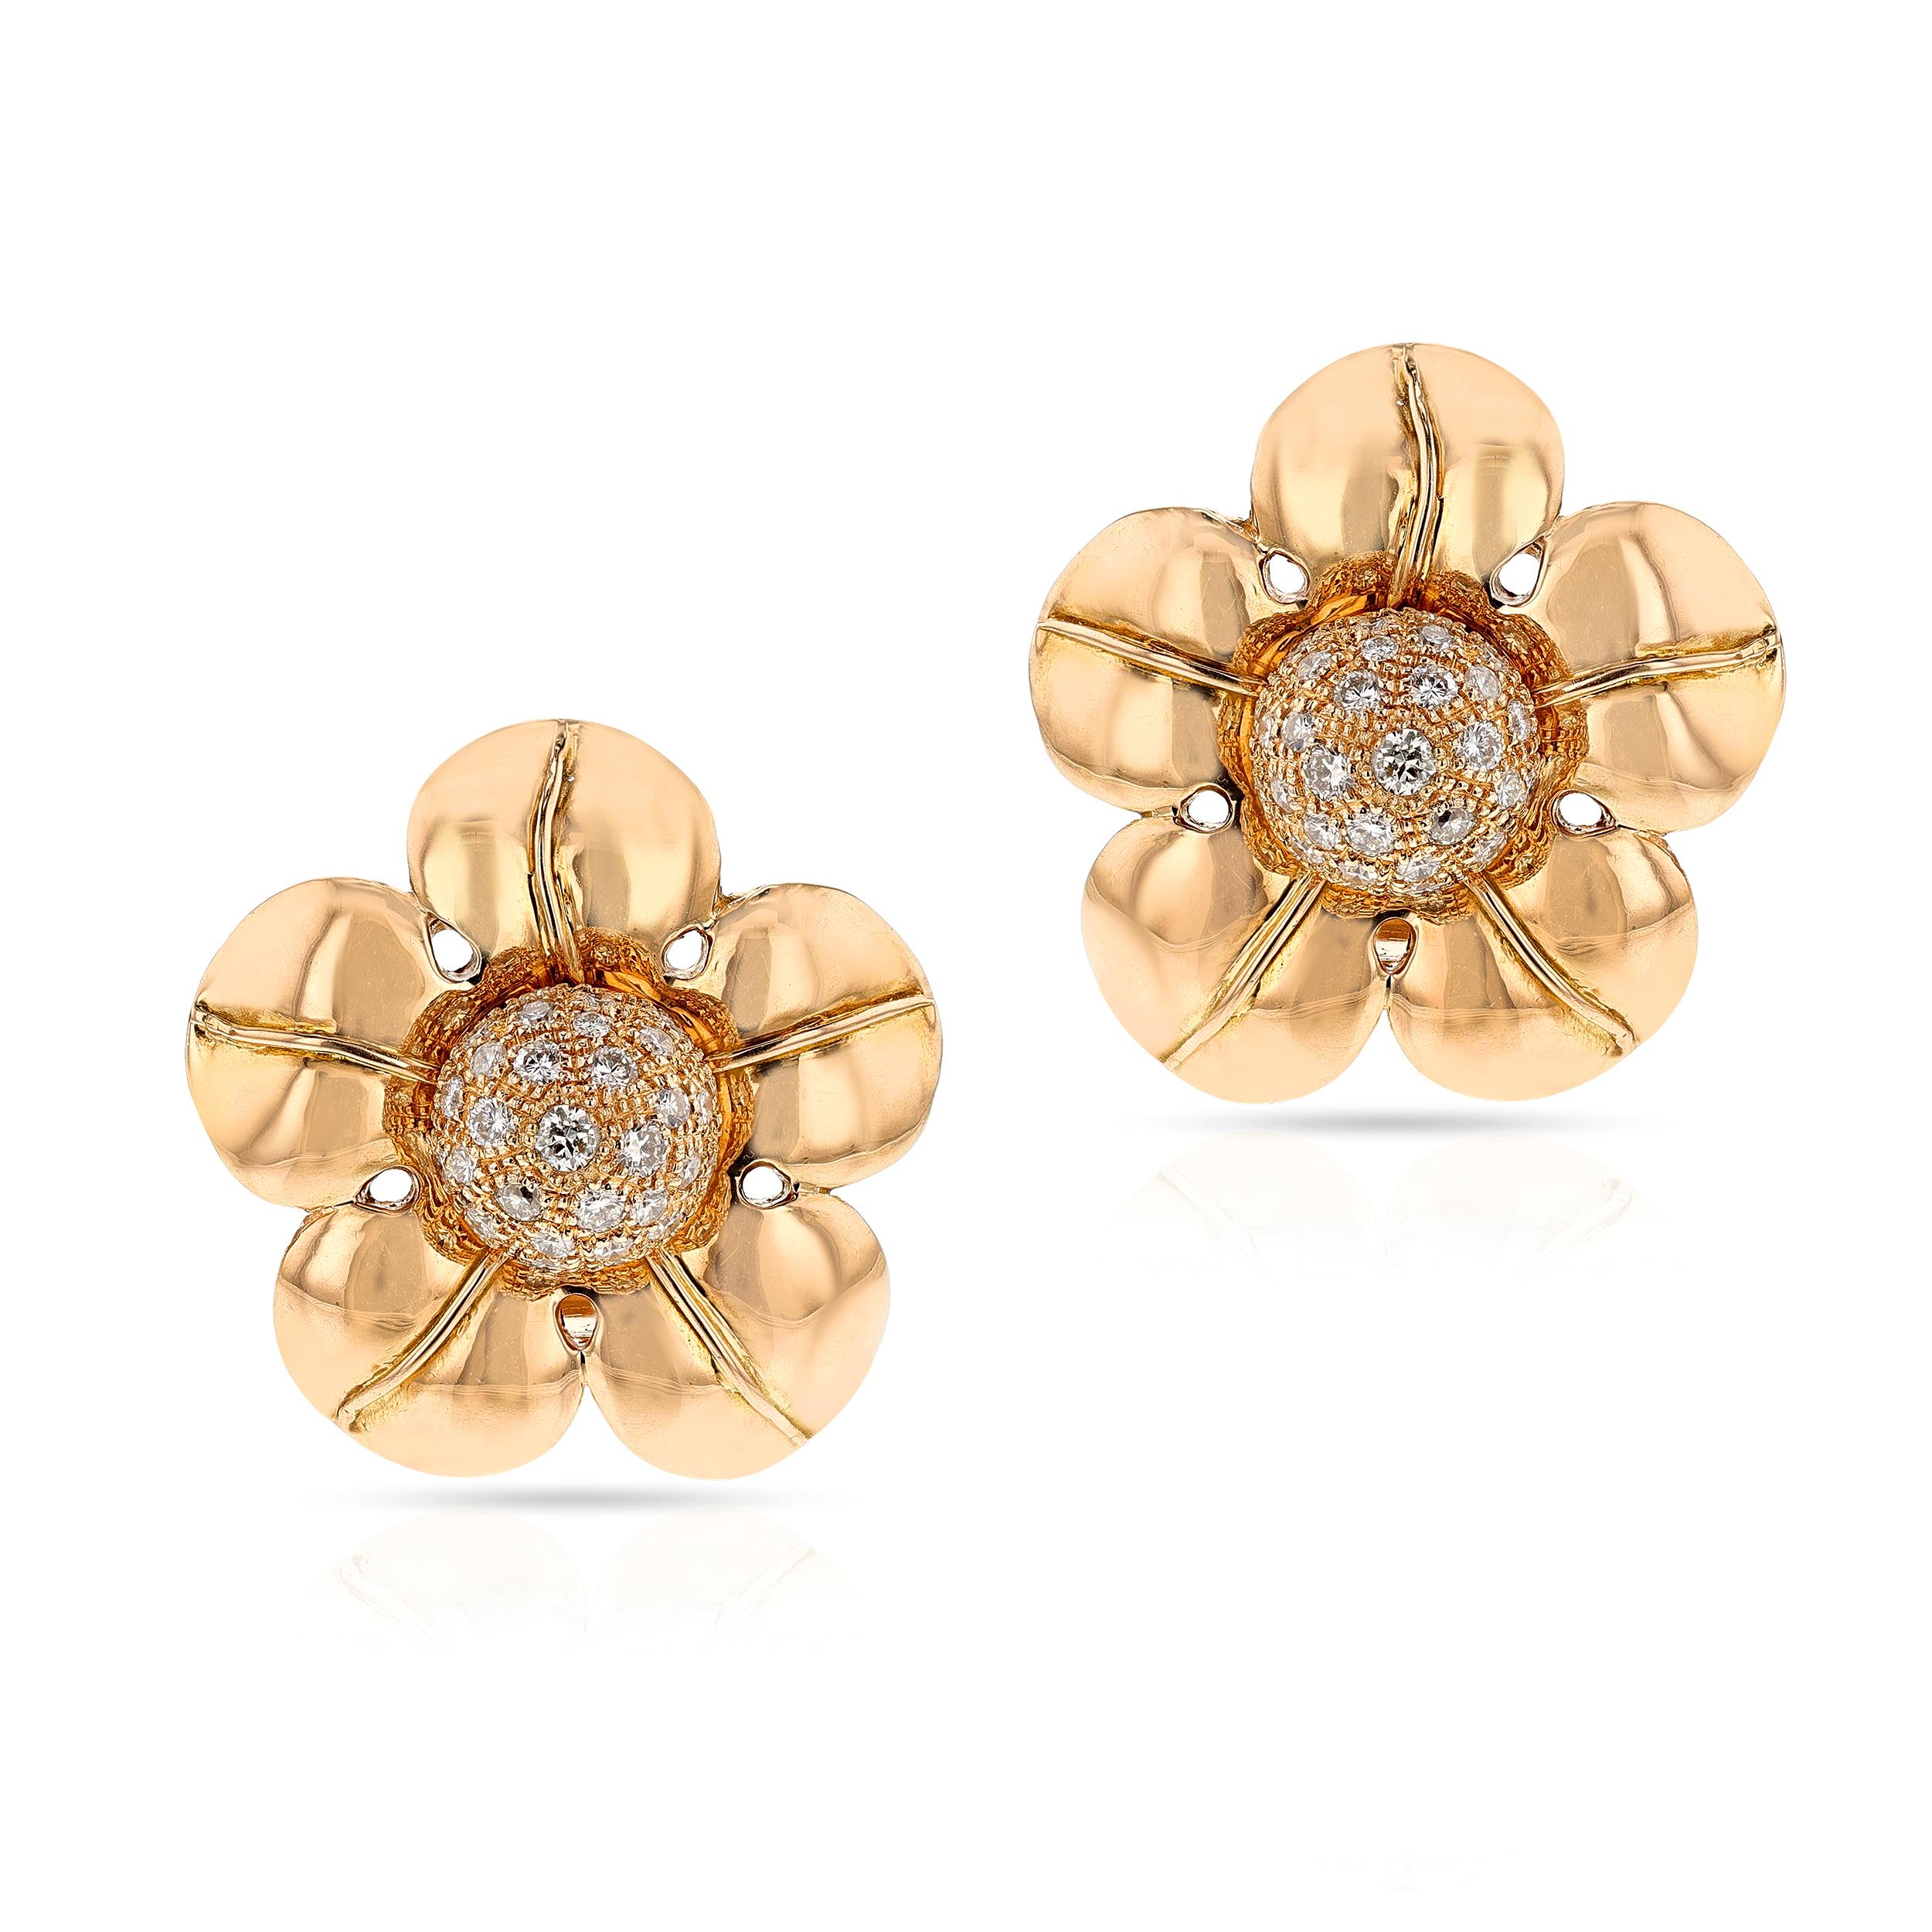 A rare pair of Van Cleef & Arpels Floral Earrings made by Pery et Fils Floral  with Gold and Diamonds in 18k. Signed and numbered. The length is 1.25 inches in diameter with appx. 3 carats of D-E-F color, VS clarity diamonds, weighing 26.80 grams.